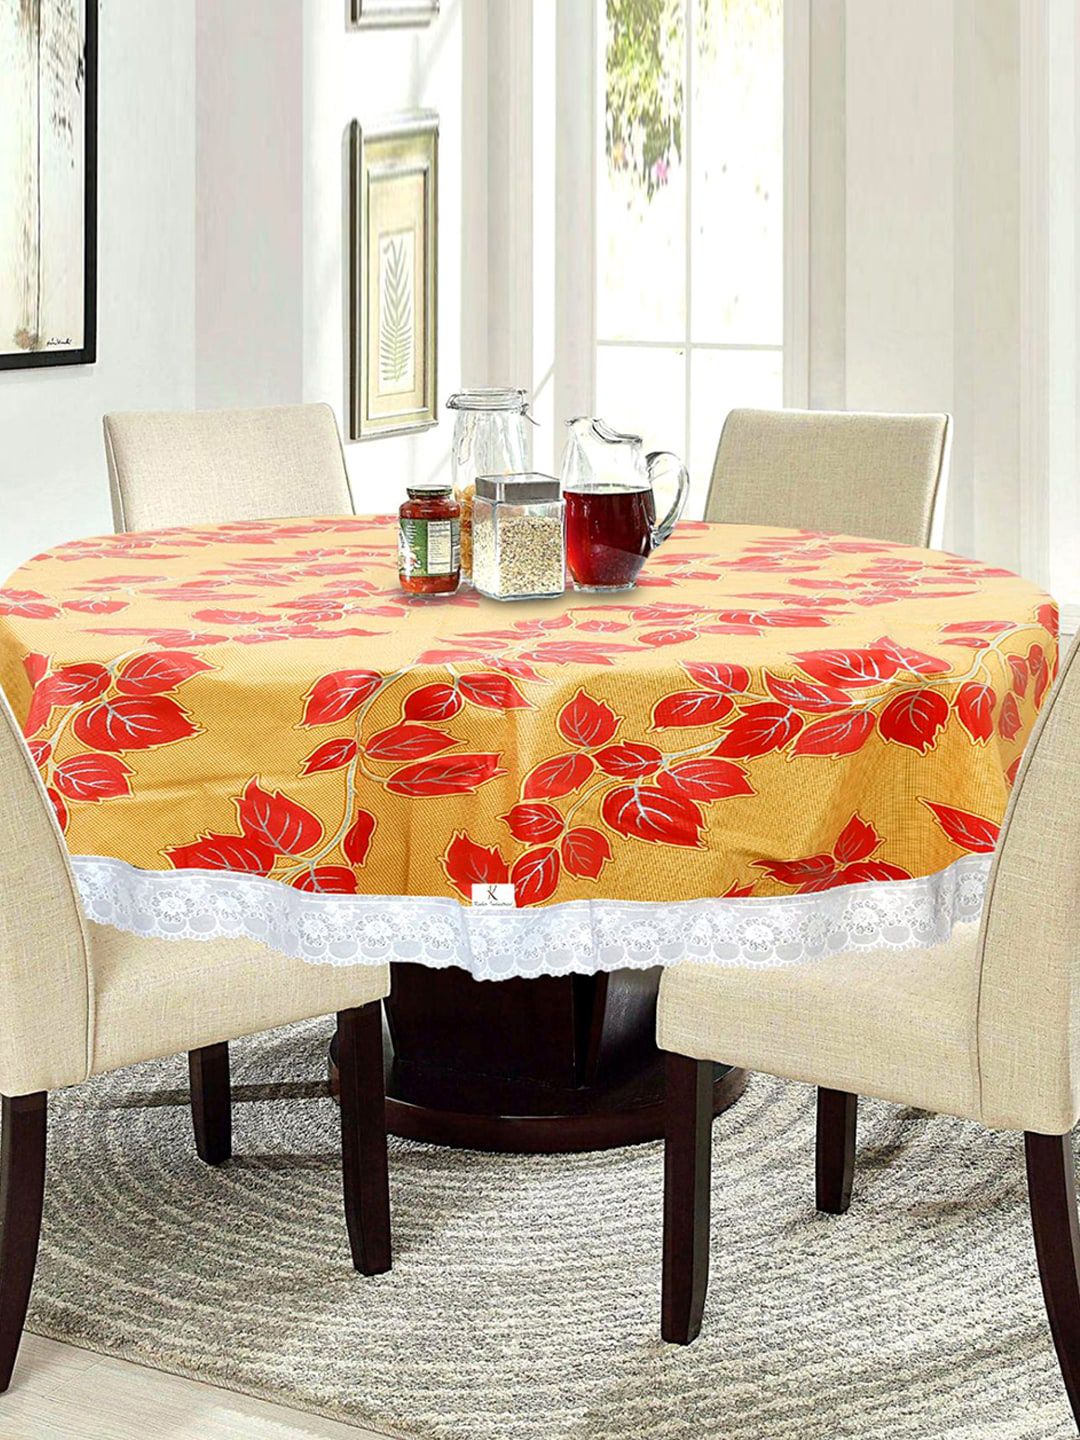 Kuber Industries Gold & Red Floral Printed Table Cover Price in India